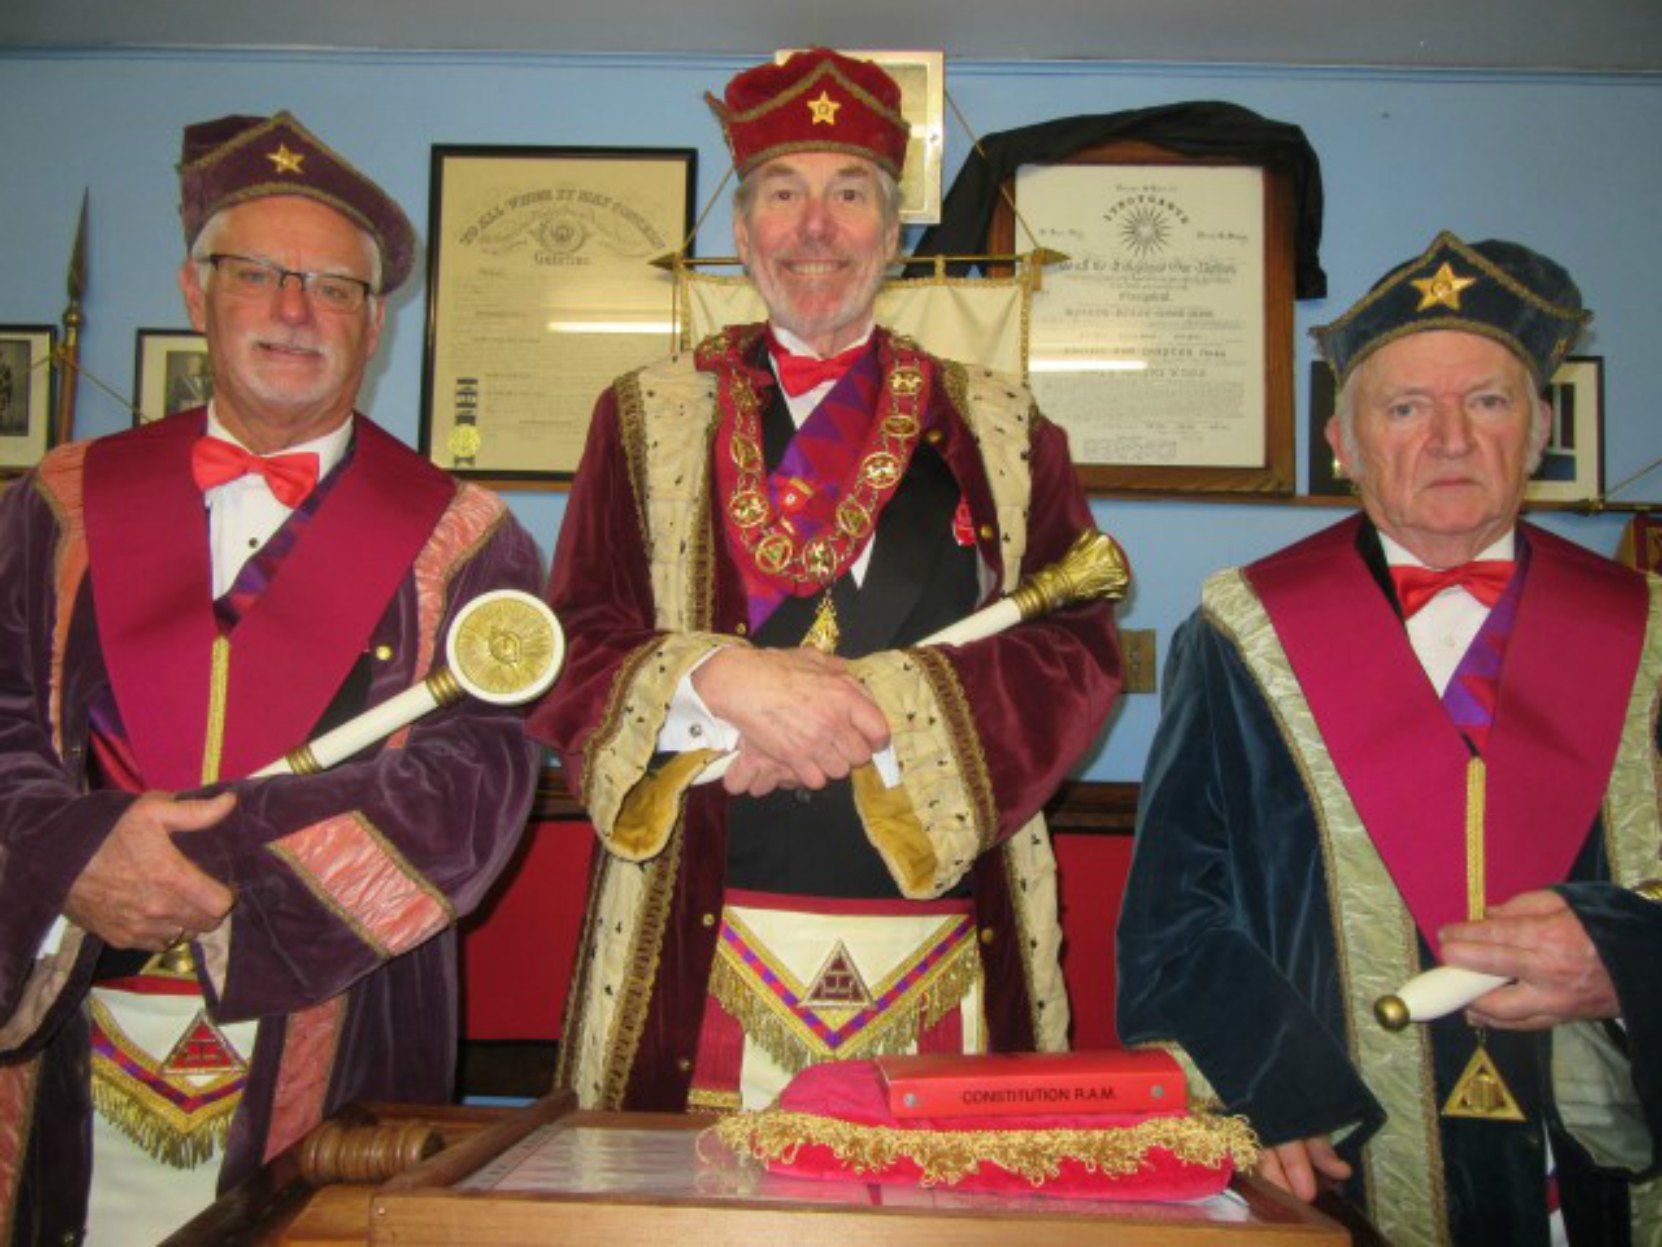 Tzouhalem Chapter's Principals for 2017. EC Rick Mellson (left), EC Paul Philcox (center), EC Bob Crawford (right) at the Joint Installation held in Sooke on 17 November 2016